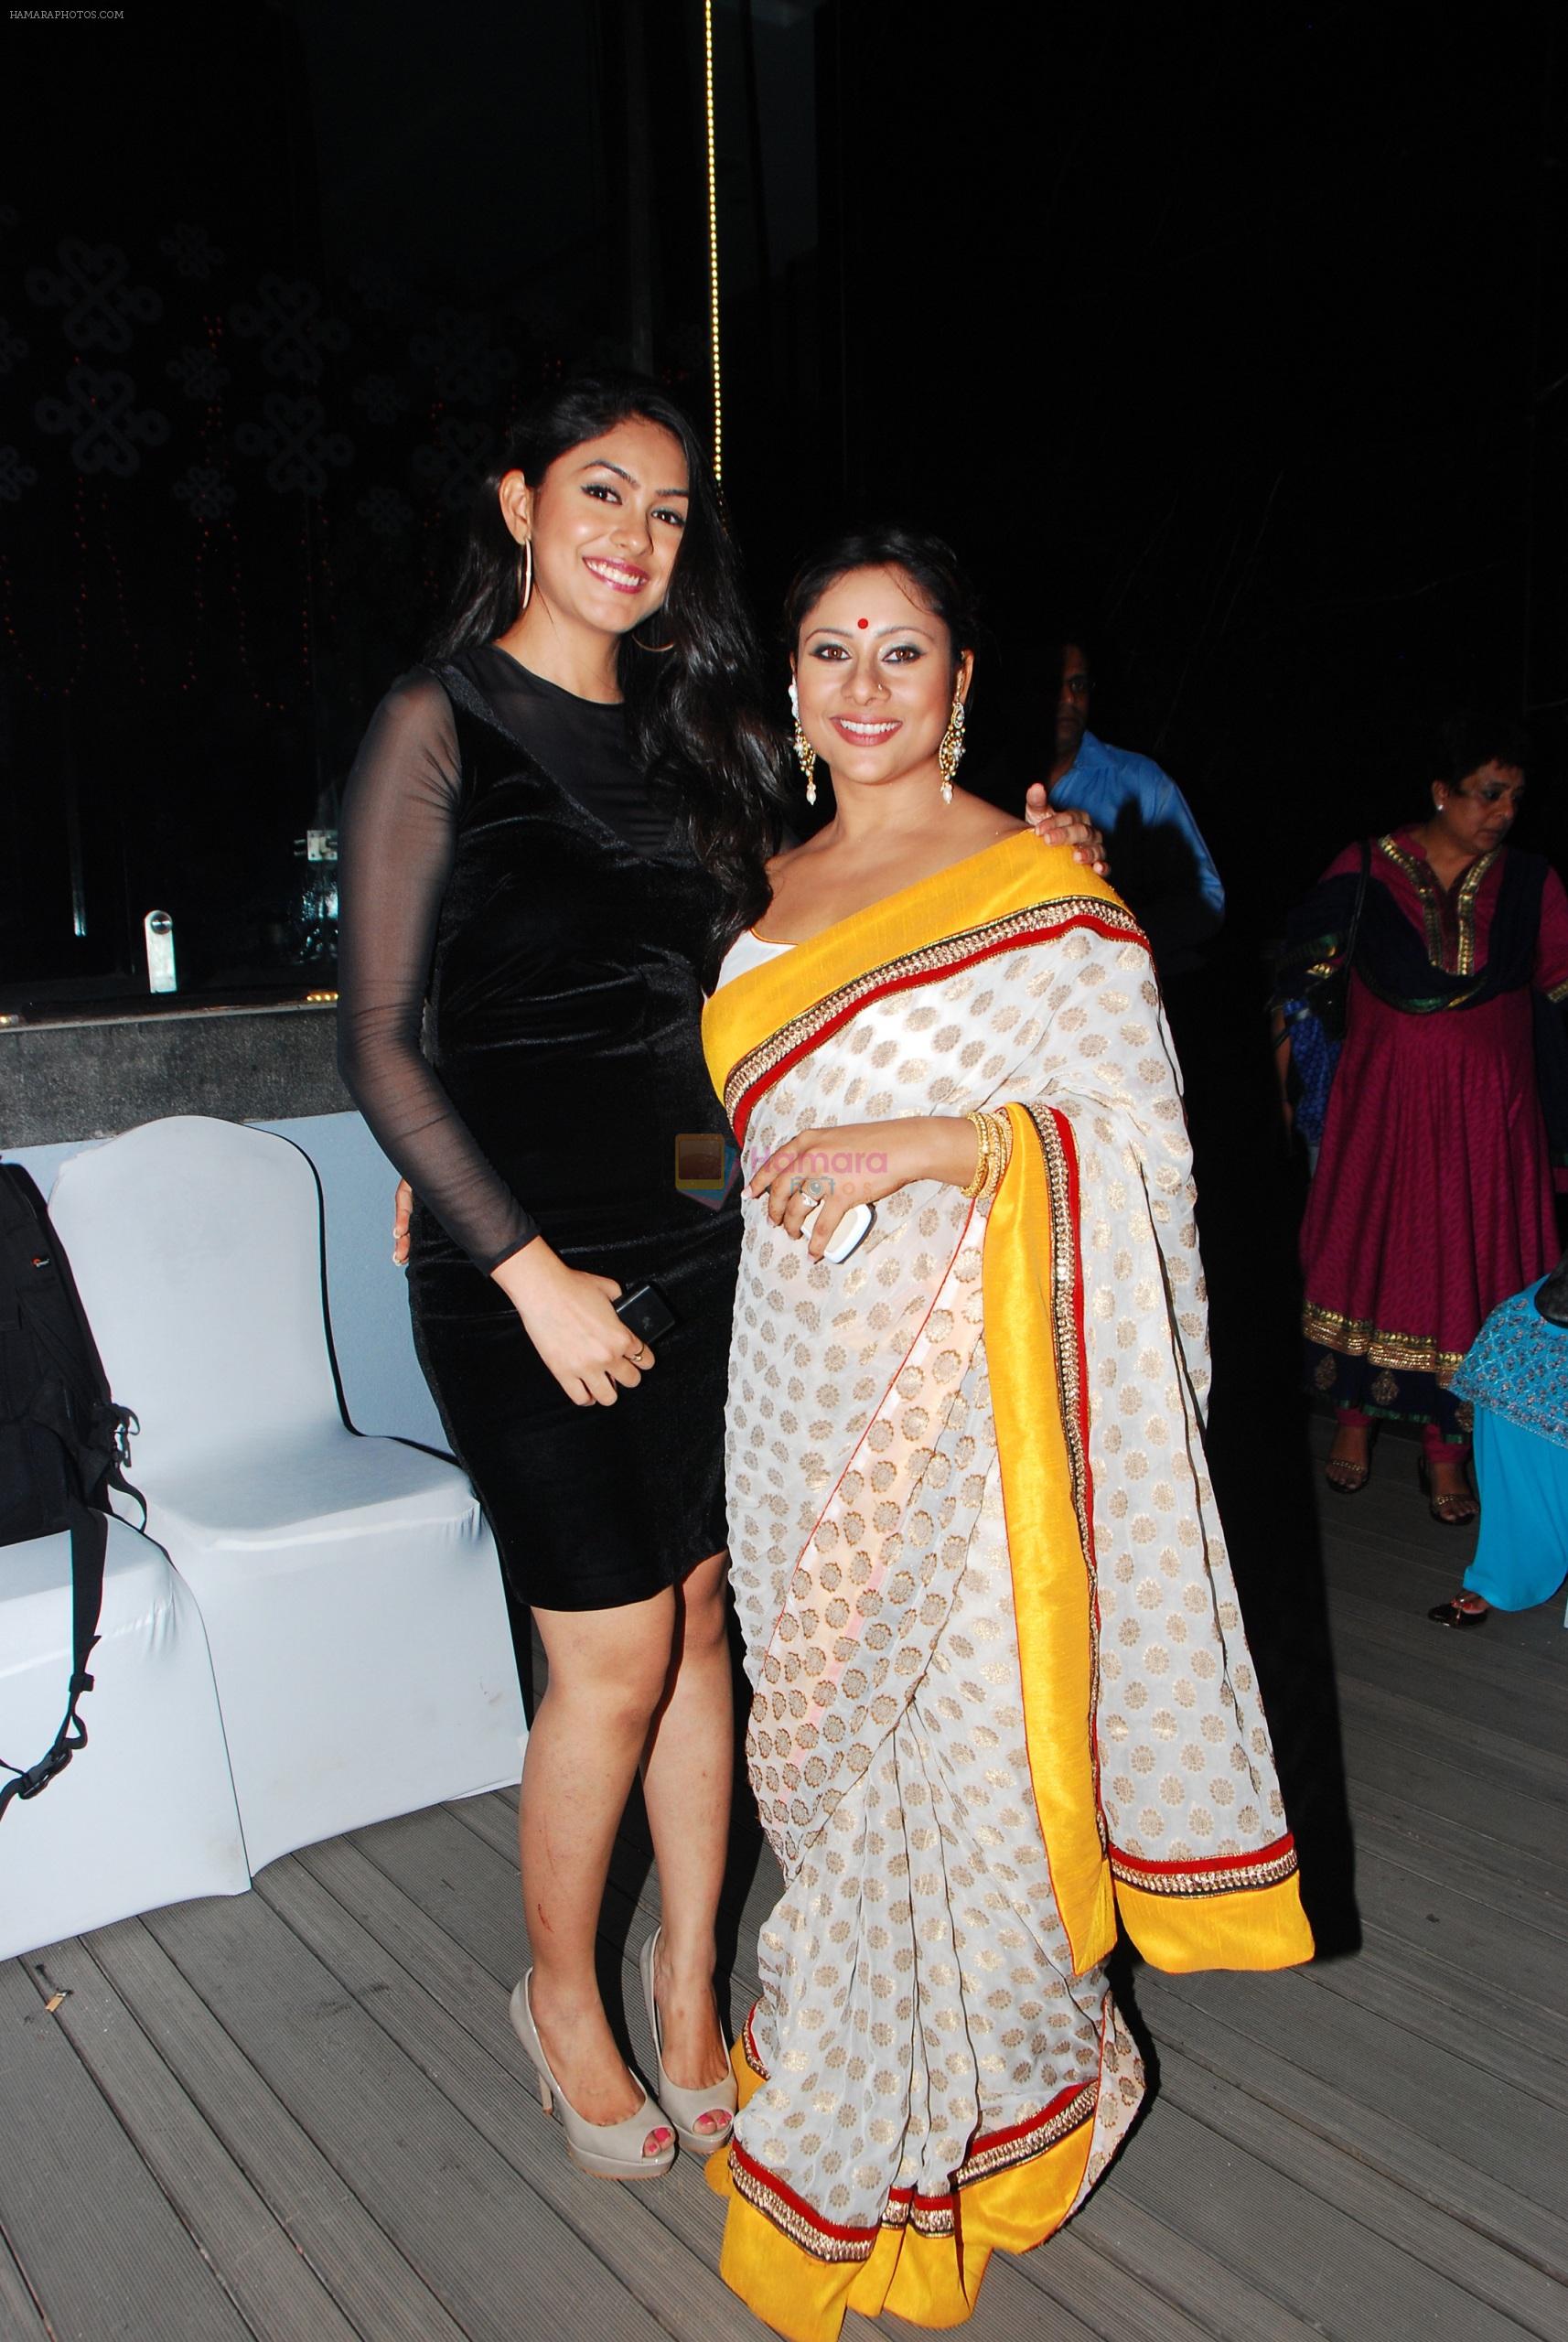 Gauri Bhosle with Sai at the launch of Sai Deodhar and Shakti Anand's Production house Thoughtrain Entertainment in Mumbai on 18th Nov 2012